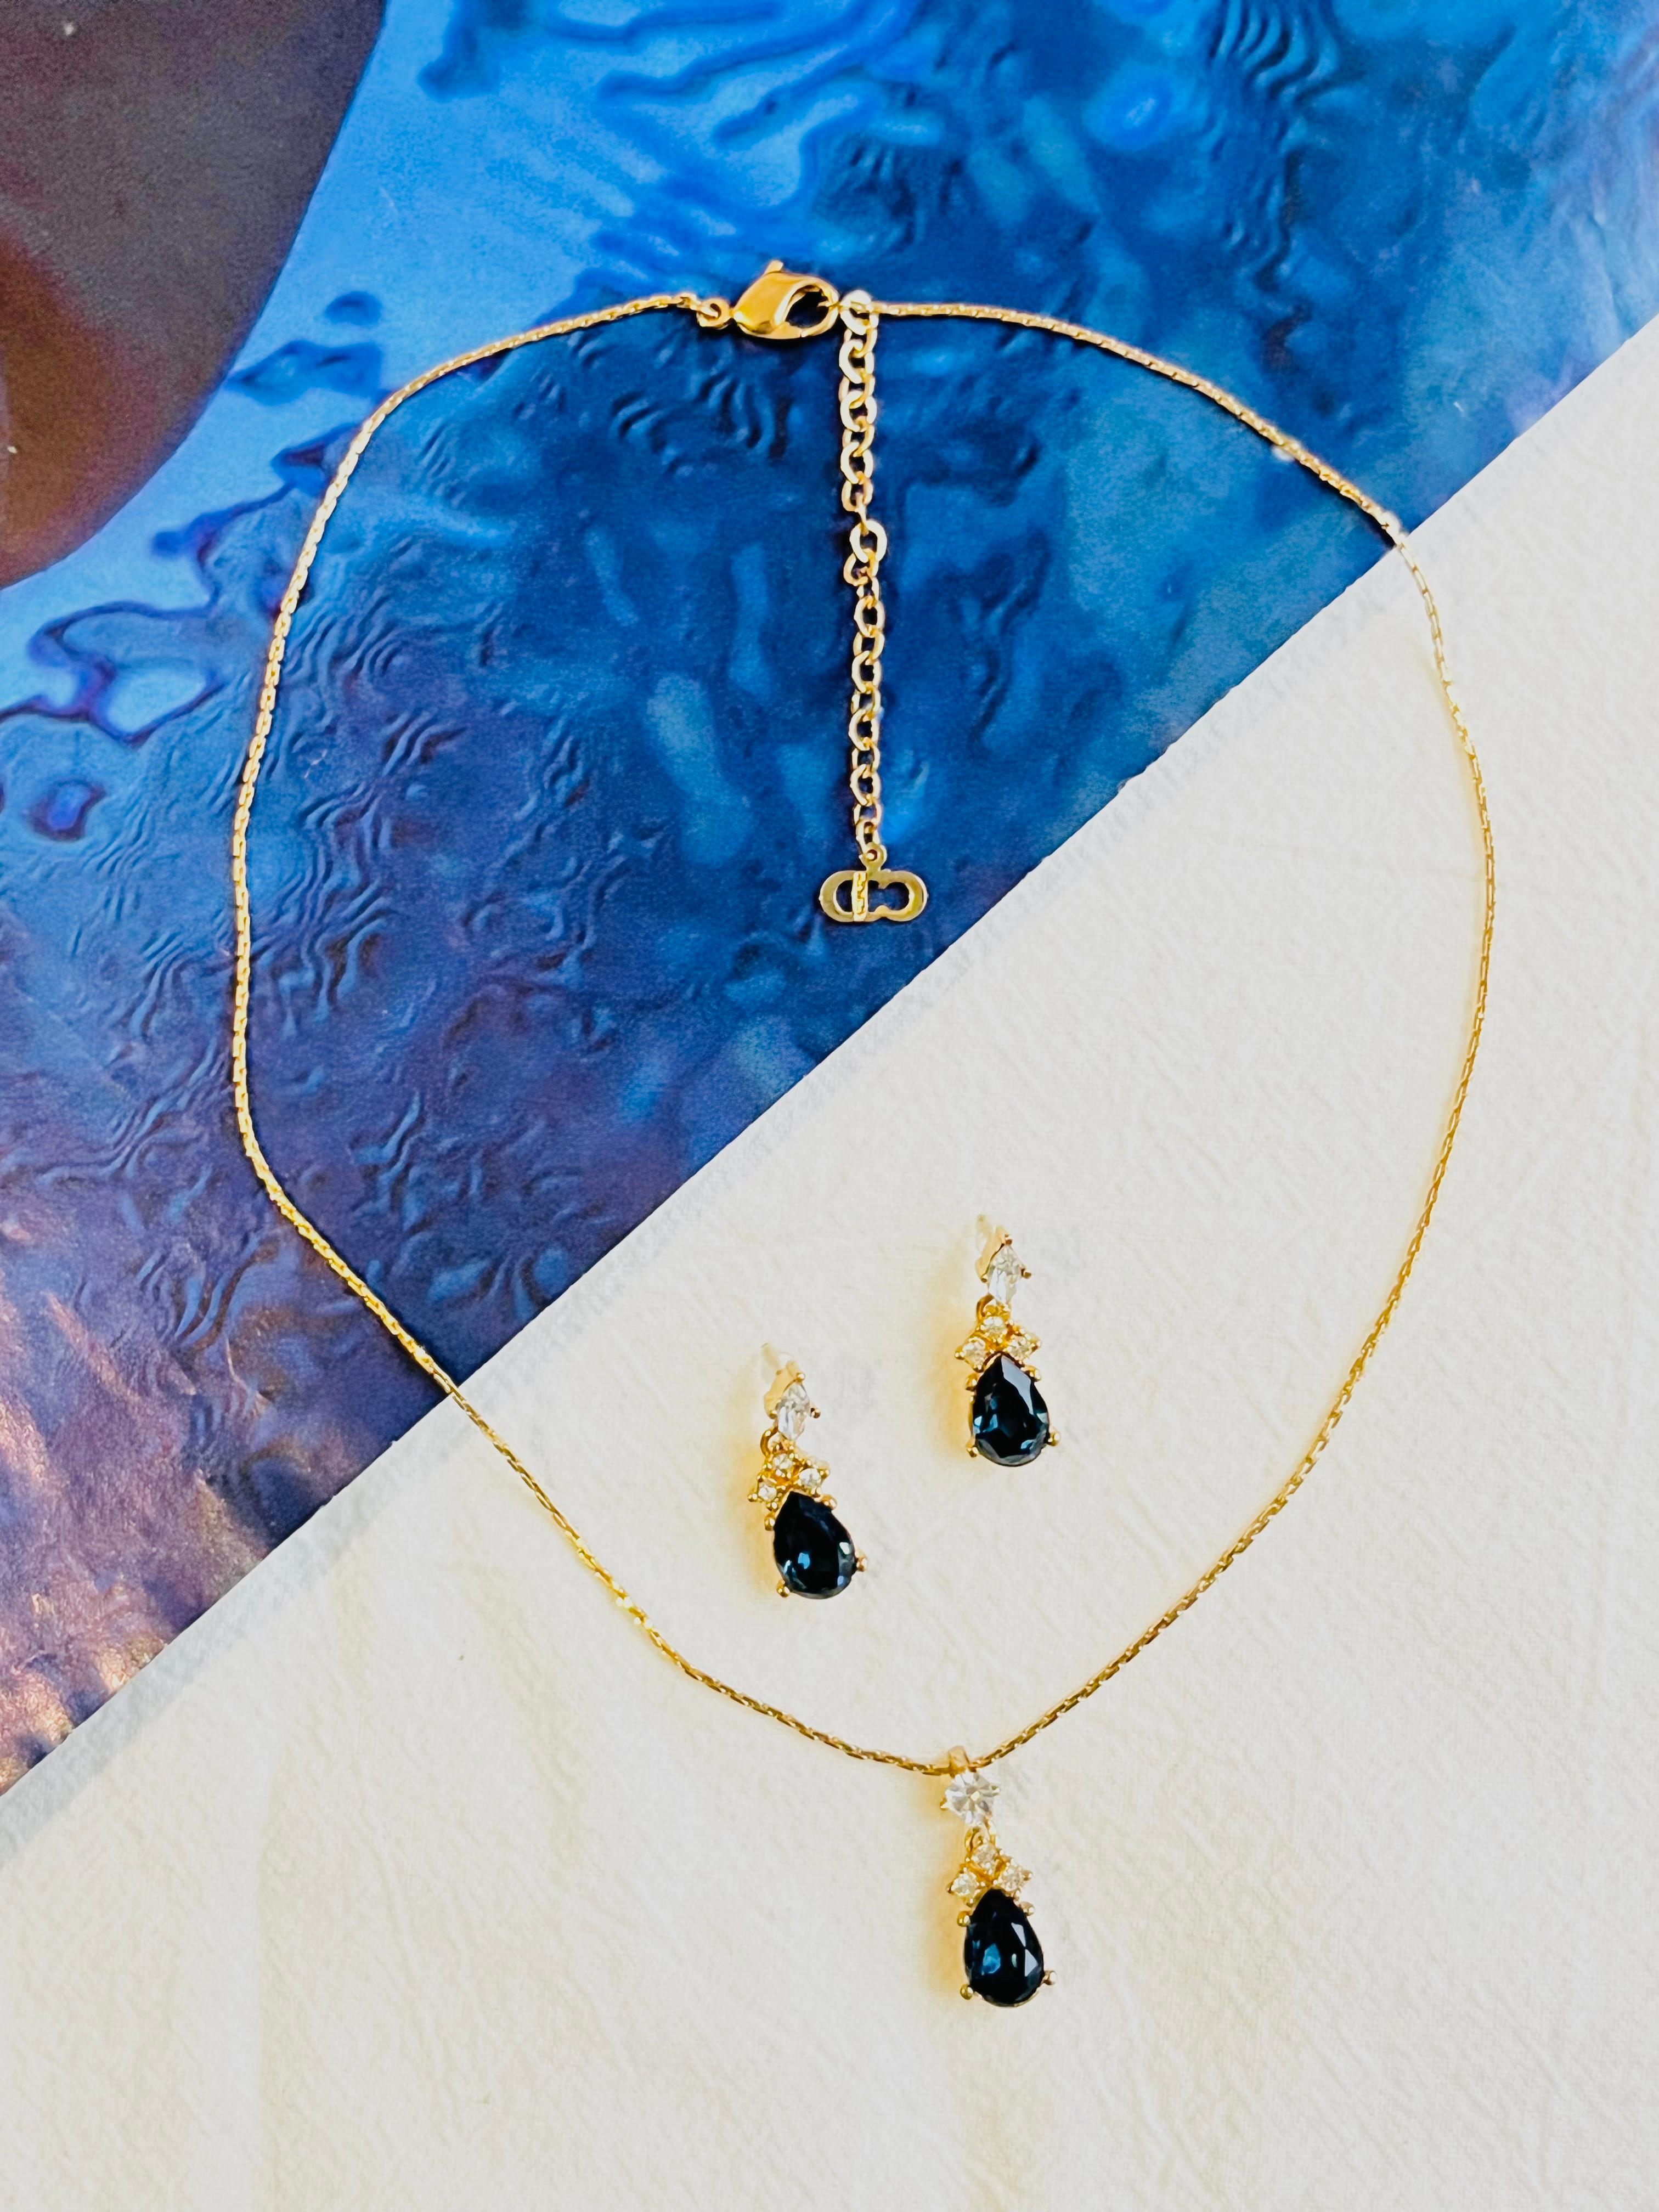 Christian Dior Vintage 1980s Sapphire Crystal Water Drop Set Necklace Earrings In Excellent Condition For Sale In Wokingham, England